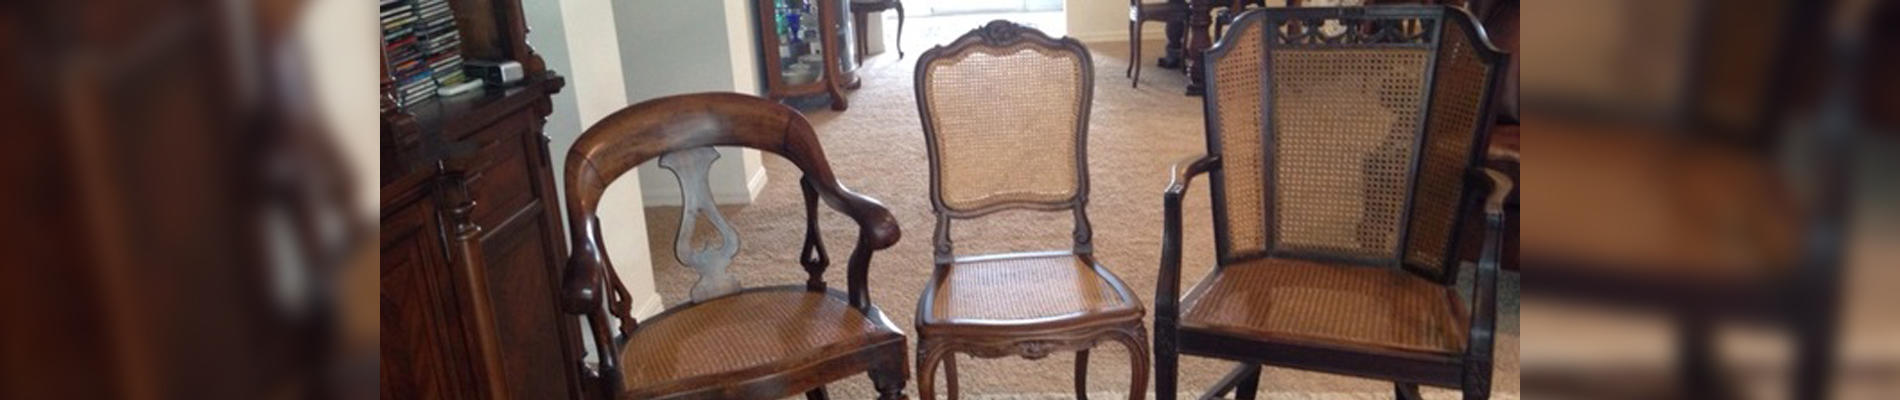 Veterans Chair Caning & Repair - New York, NY 10001 - (212)564-4560 | ShowMeLocal.com